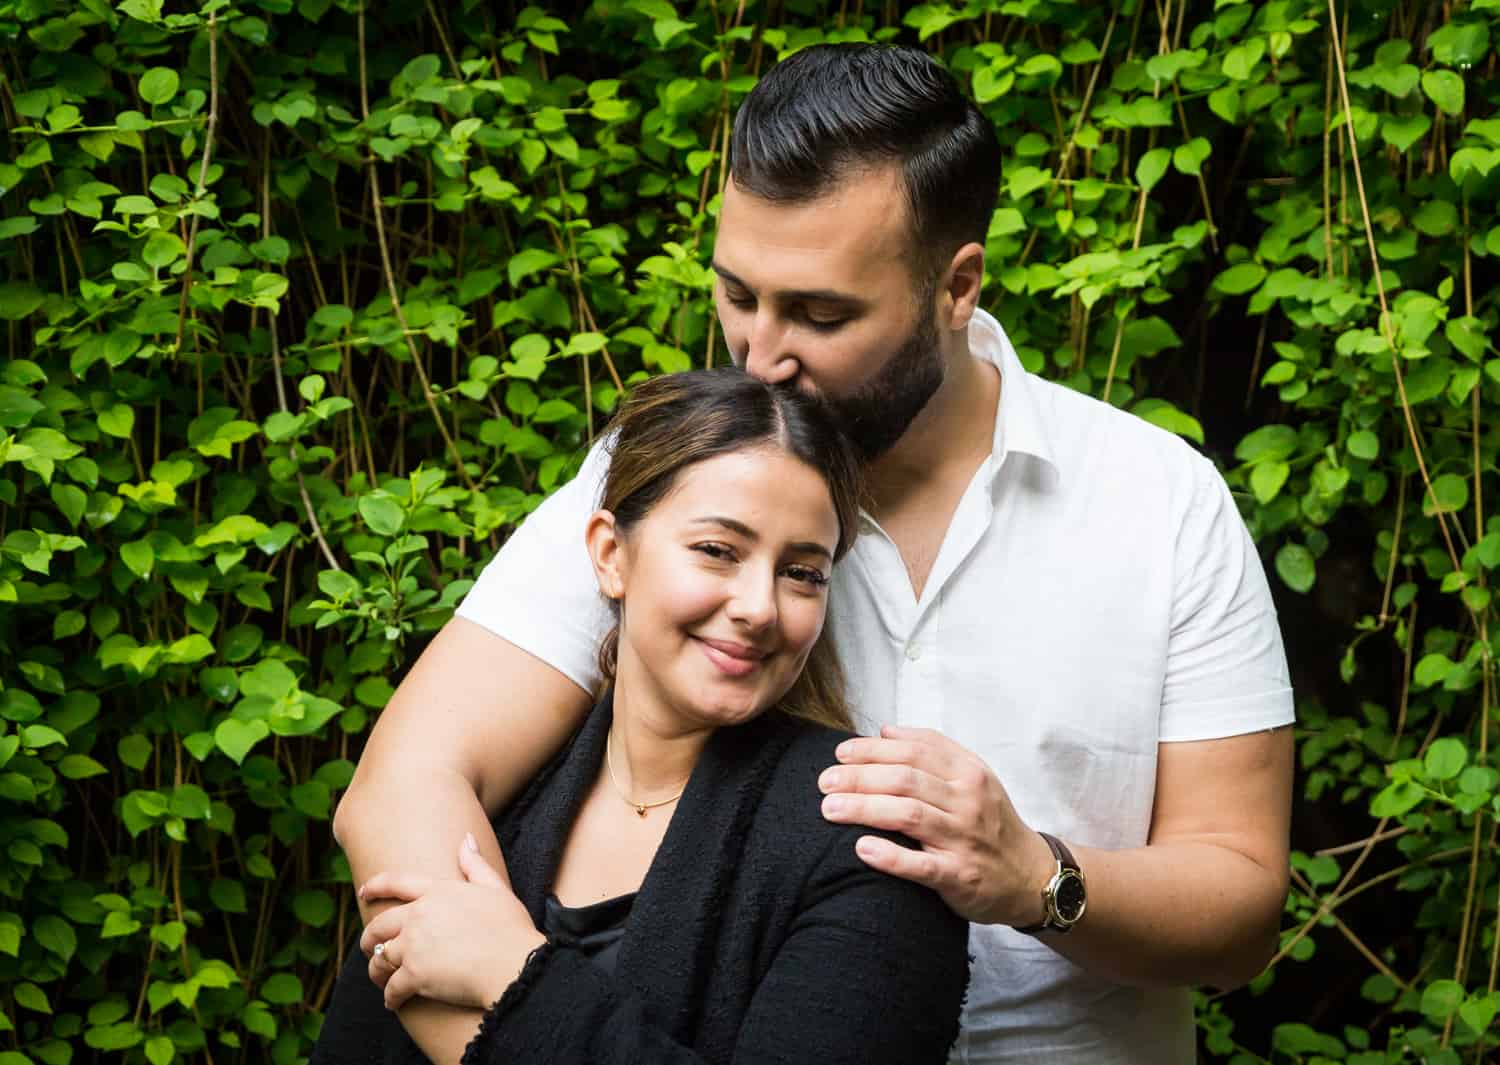 Man kissing woman's head in front of ivy-covered wall